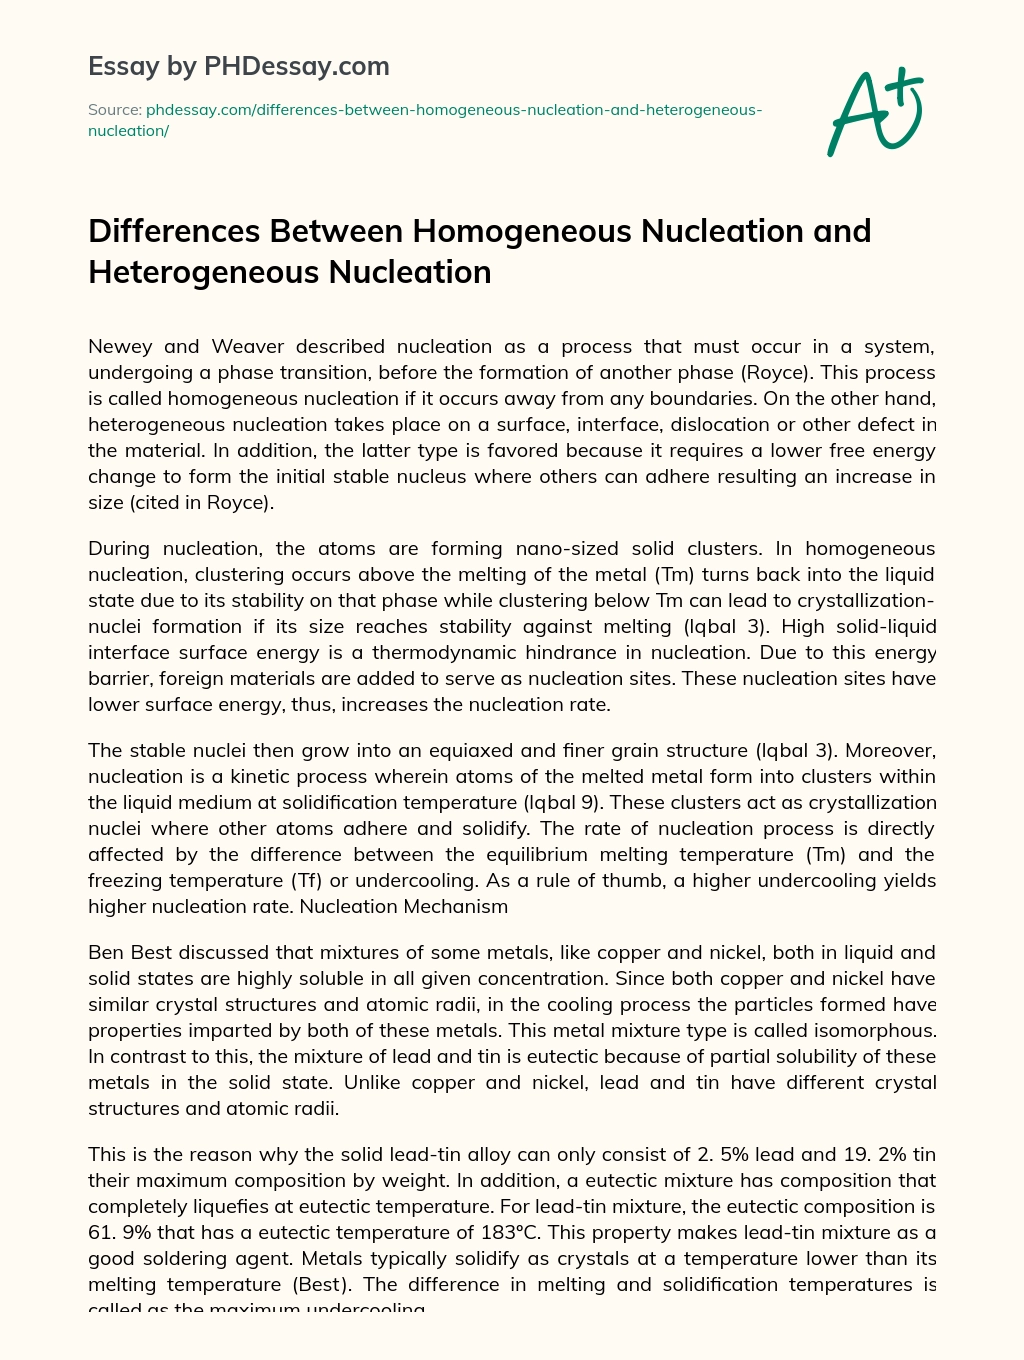 Differences Between Homogeneous Nucleation and Heterogeneous Nucleation essay